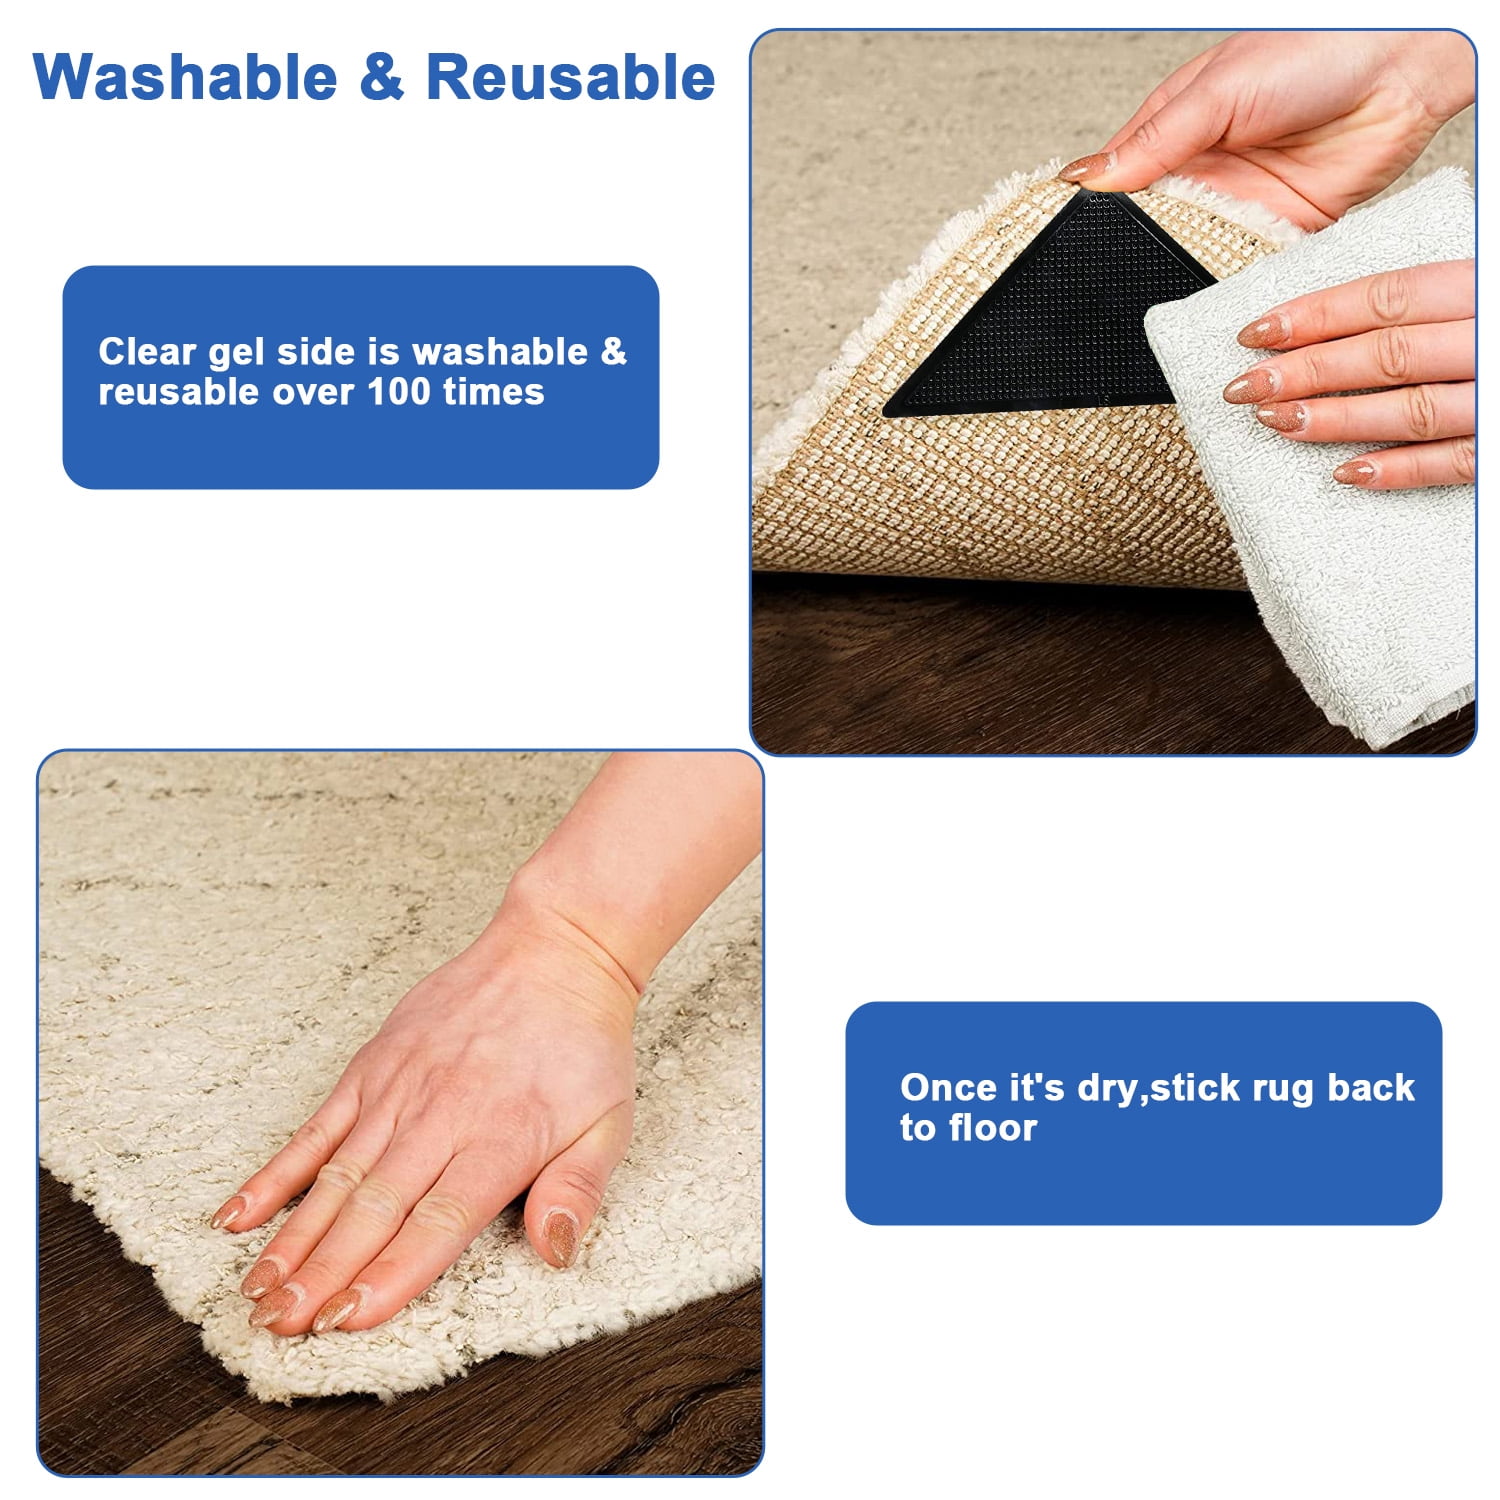  Stay Put Rug Non-Slip SAFETY GRIPS- Keeps rugs from lifting,  shifting or curling (4) : Home & Kitchen